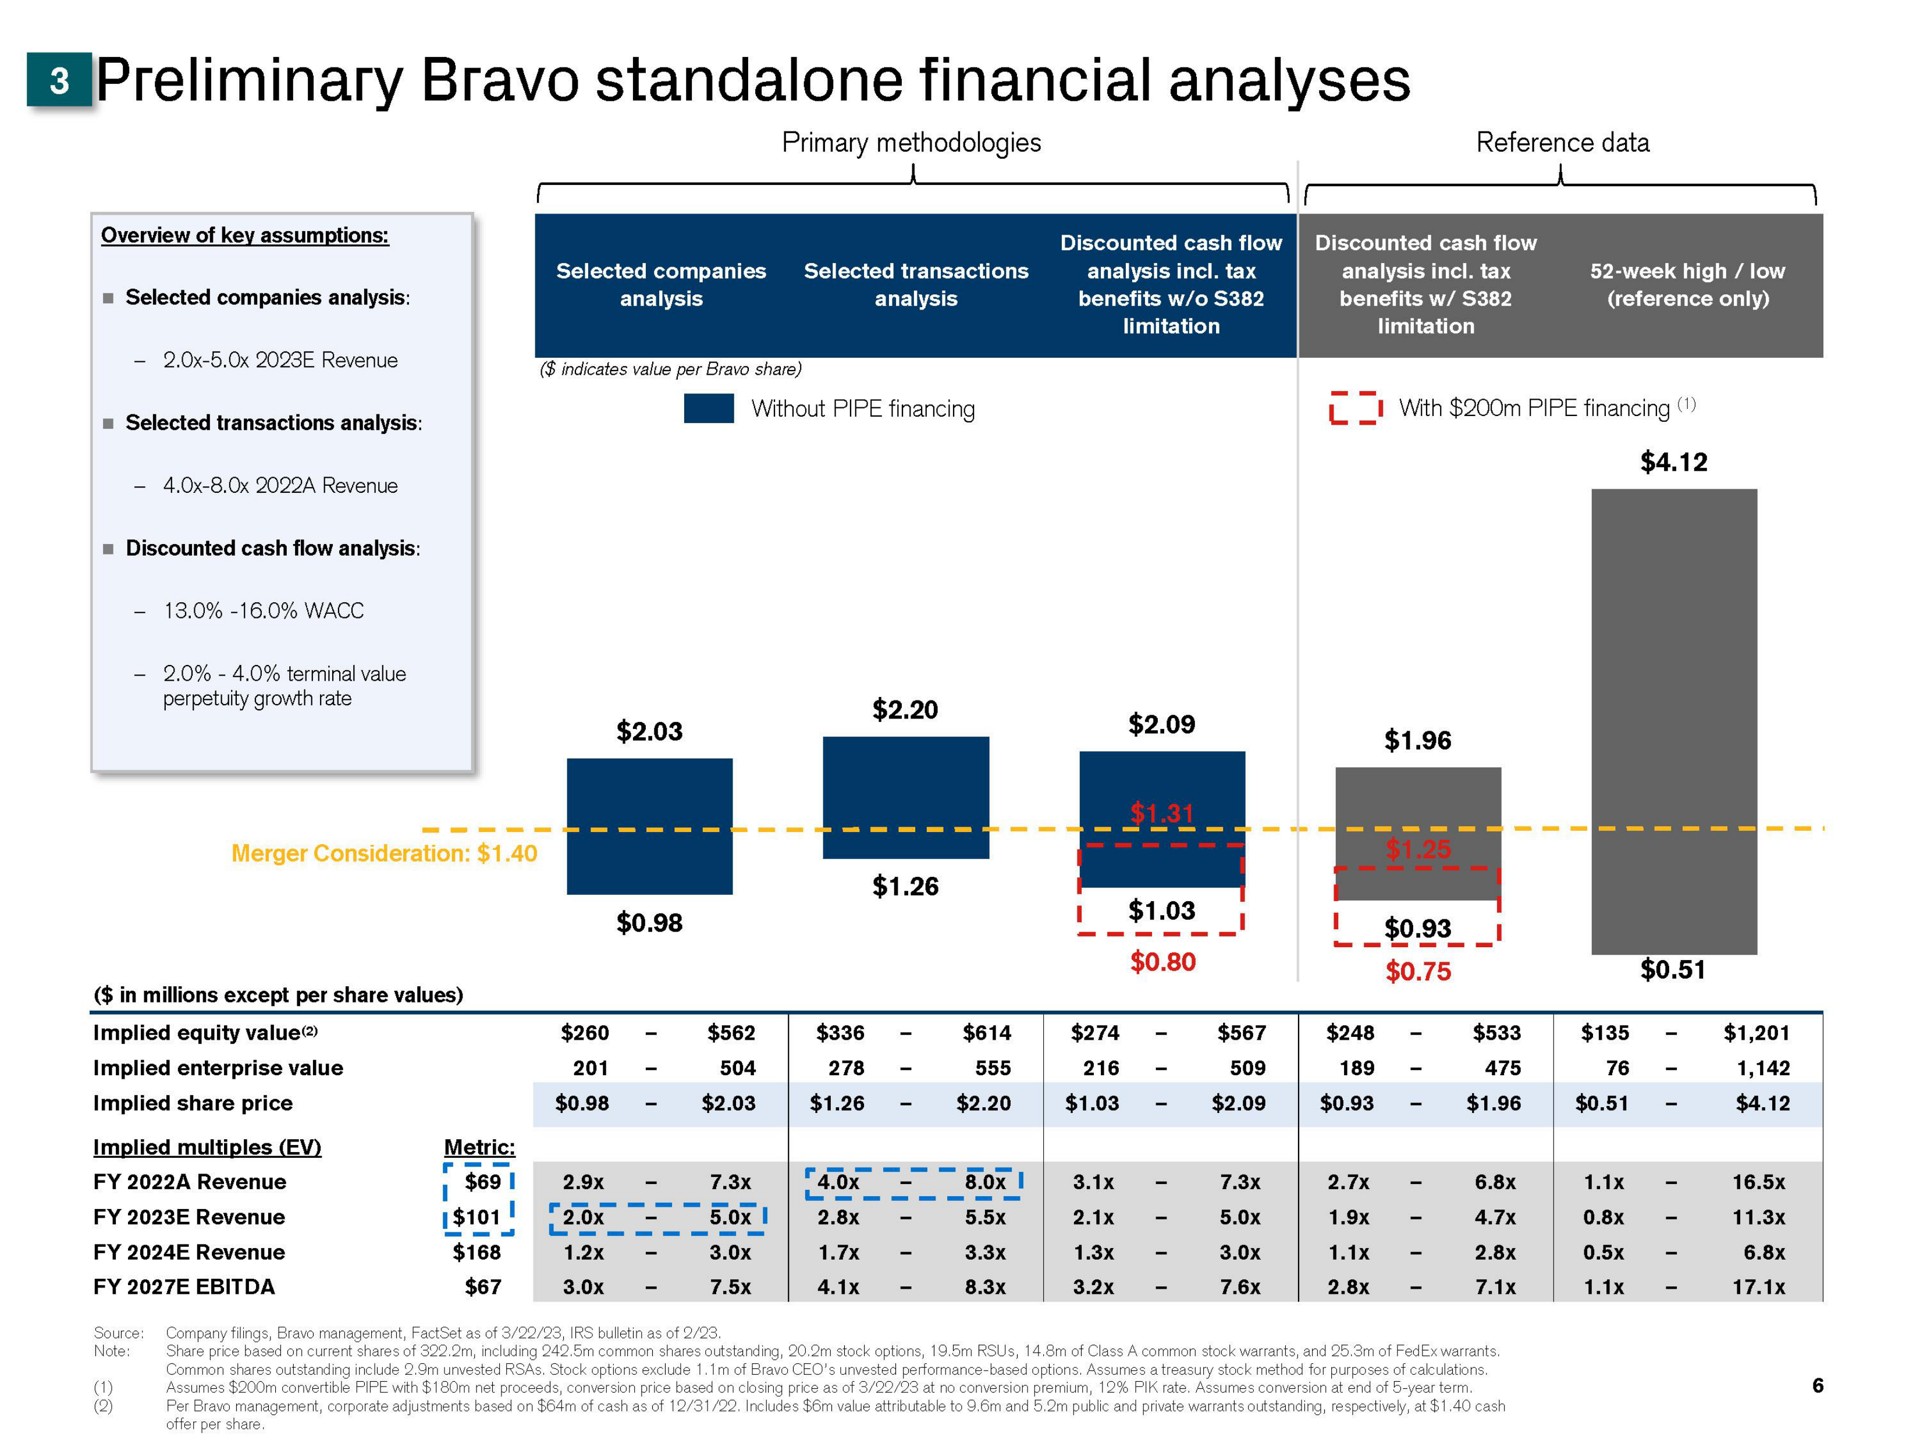 bravo financial analyses primary methodologies reference data without pipe financing with pipe financing | Credit Suisse